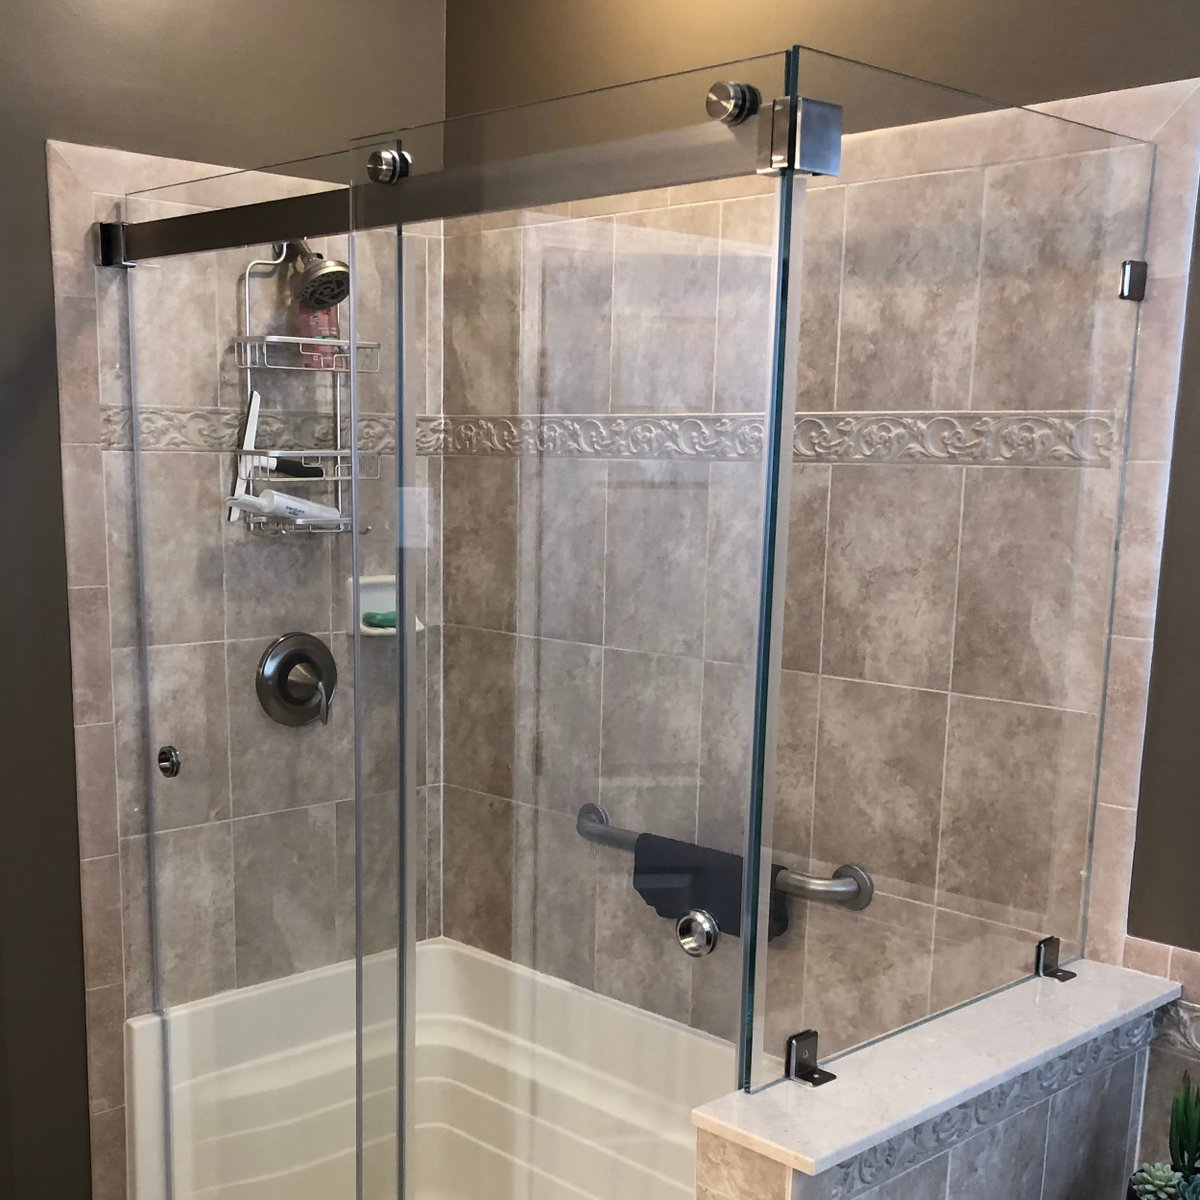 We installed this frameless sliding glass shower for a client! It's such a modern touch to this bathroom. We highly recommend it for anyone looking to upgrade their shower! #glass #customshower #shower #framelessshower #slidingglass #bathroomdecor #showerdesign #interiordesign